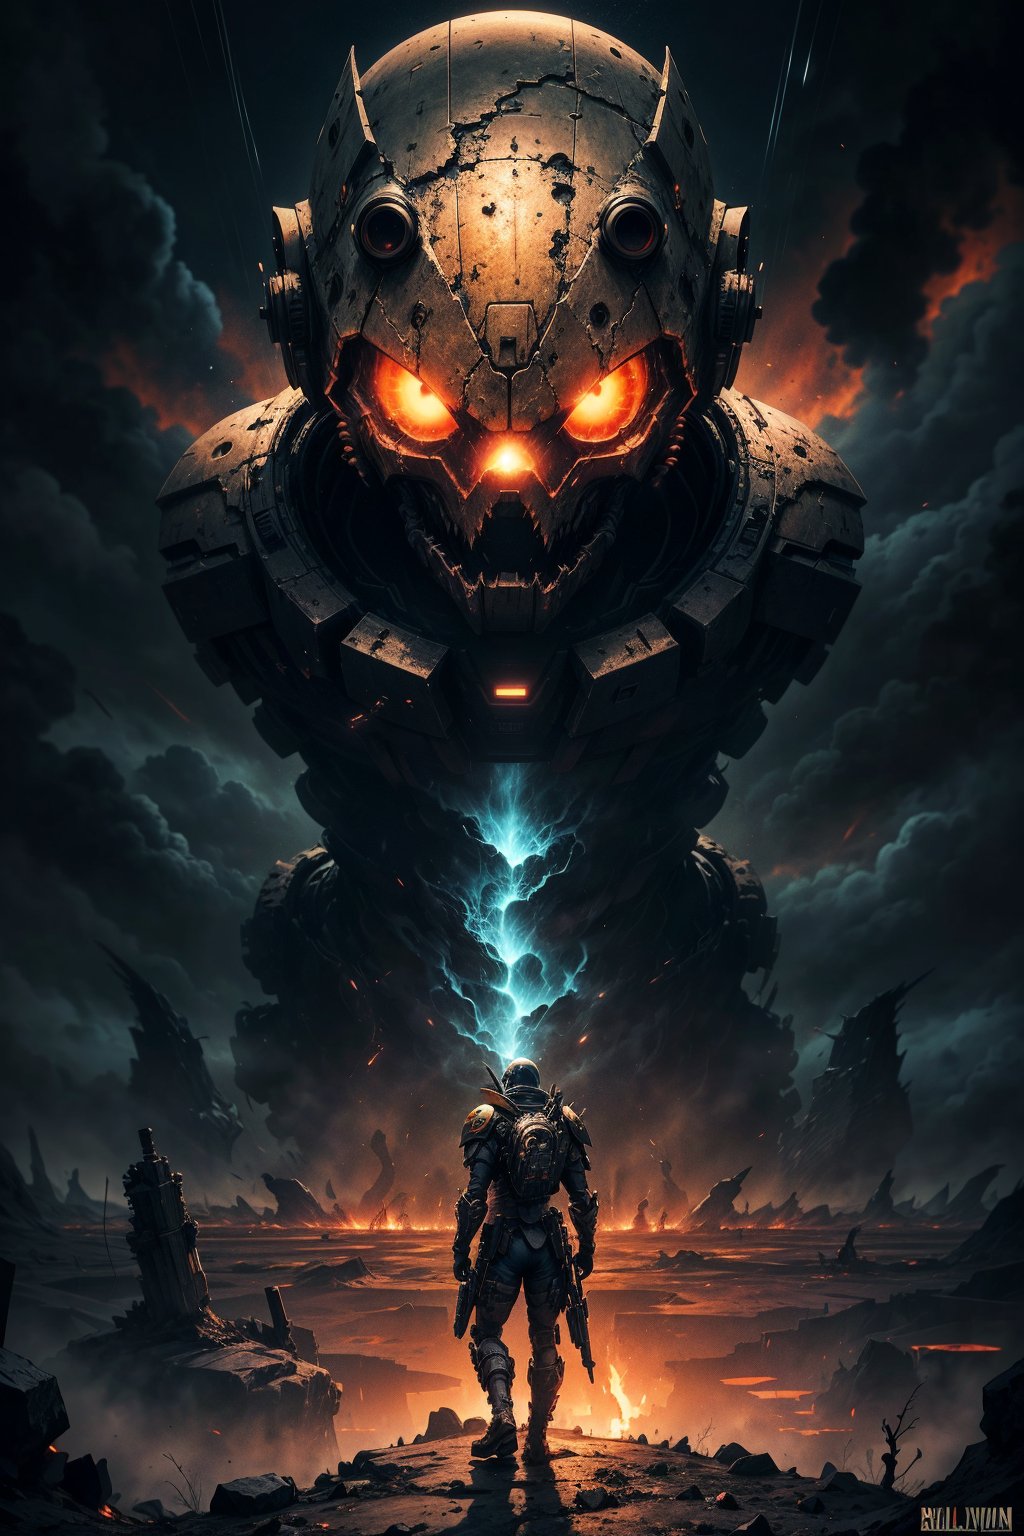 A lone Helldiver stands vigilant on the ravaged surface of Xeridia-IV, a volcanic wasteland consumed by an army of robotic humanoids. The air is thick with an eerie orange haze as the Helldiver's advanced sensors scan the desolate landscape, its dark, glowing eyes burning with a sense of impending doom. The metallic humanoid horde looms in the shadows, their cold, calculating gazes fixed on the Helldiver, exuding an atmosphere of dread and fear.